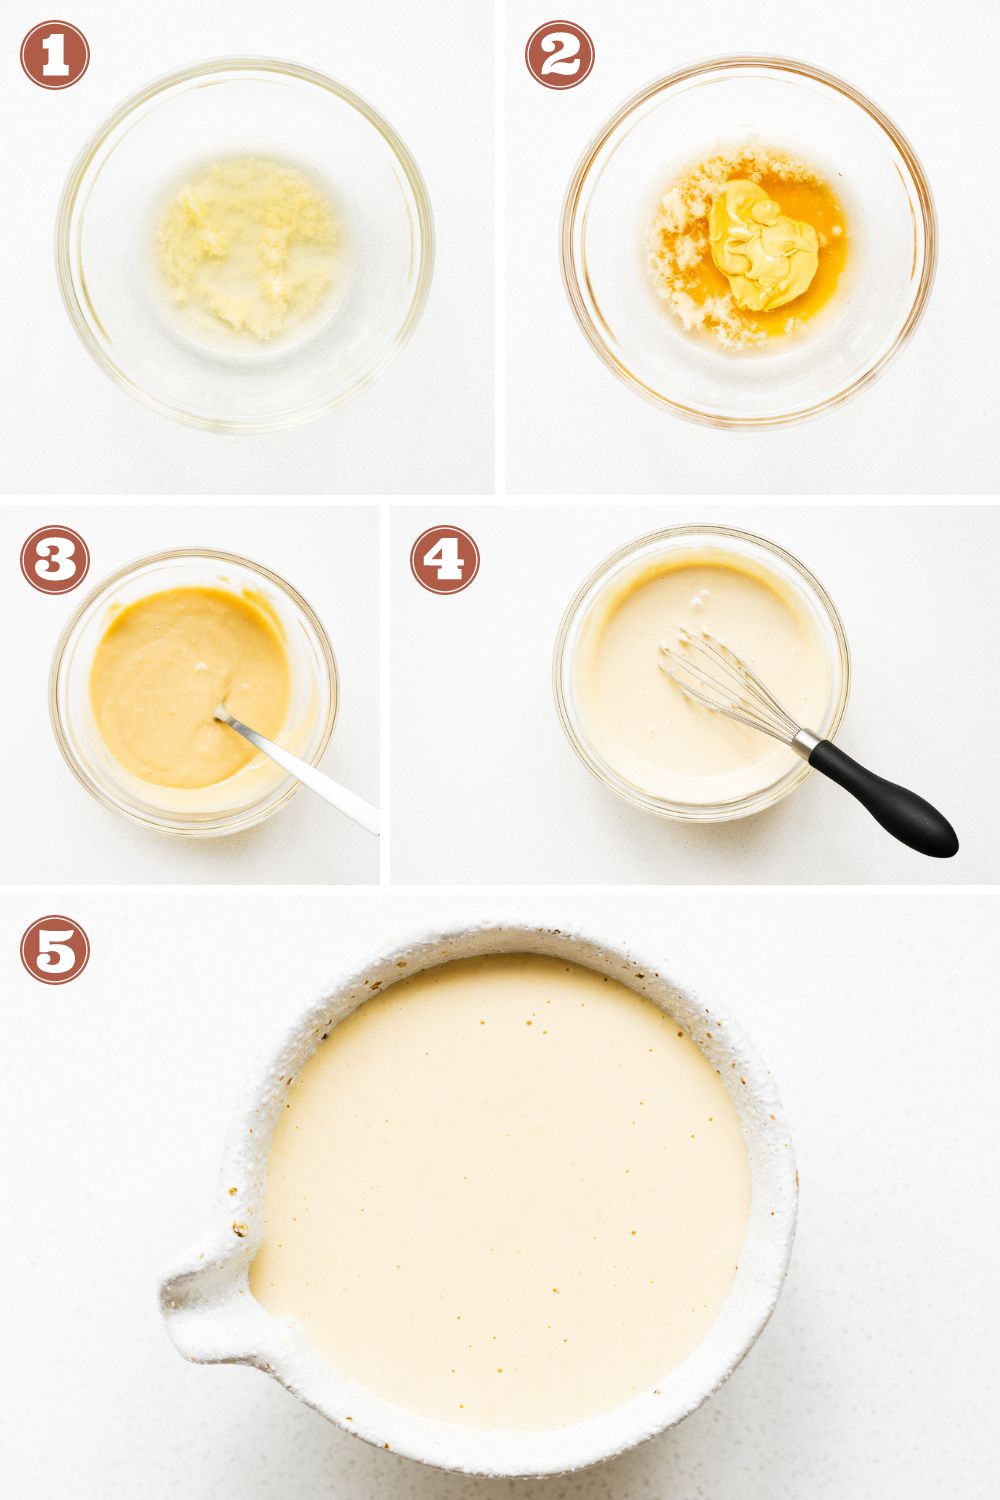 A step-by-step guide for how to make maple tahini dressing. The steps consists of mellowing garlic in vinegar, mixing in maple syrup and dijon mustard, adding tahini, whisking in water, and seasoning to taste.